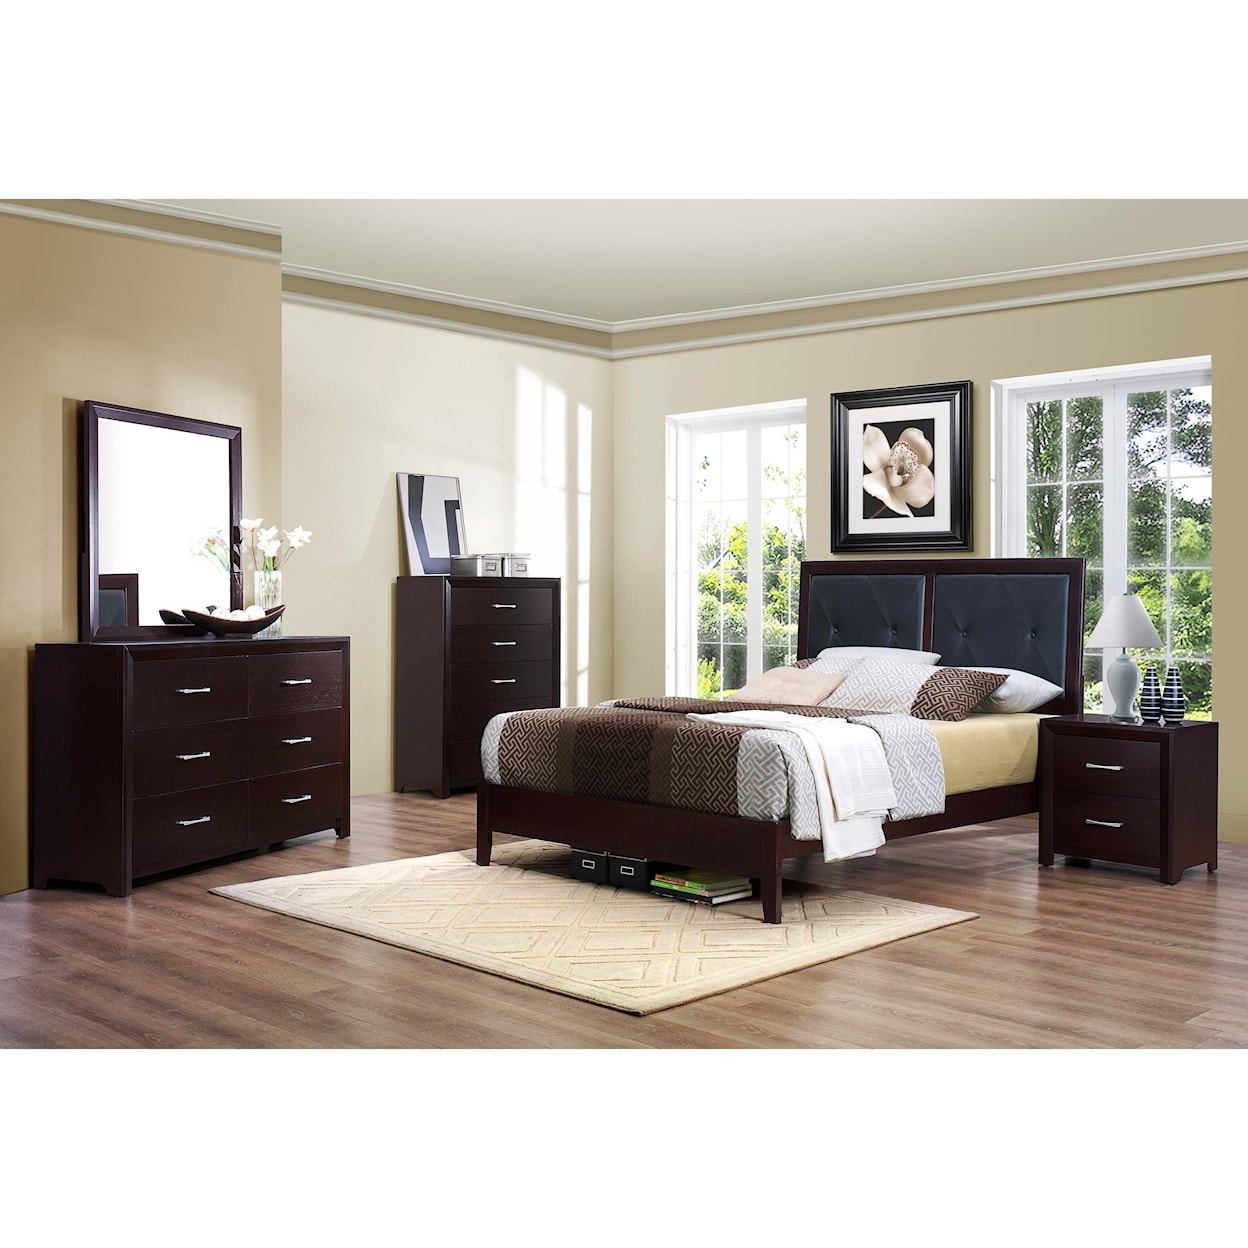 Homelegance Furniture Edina Full Bedroom Group without Chest